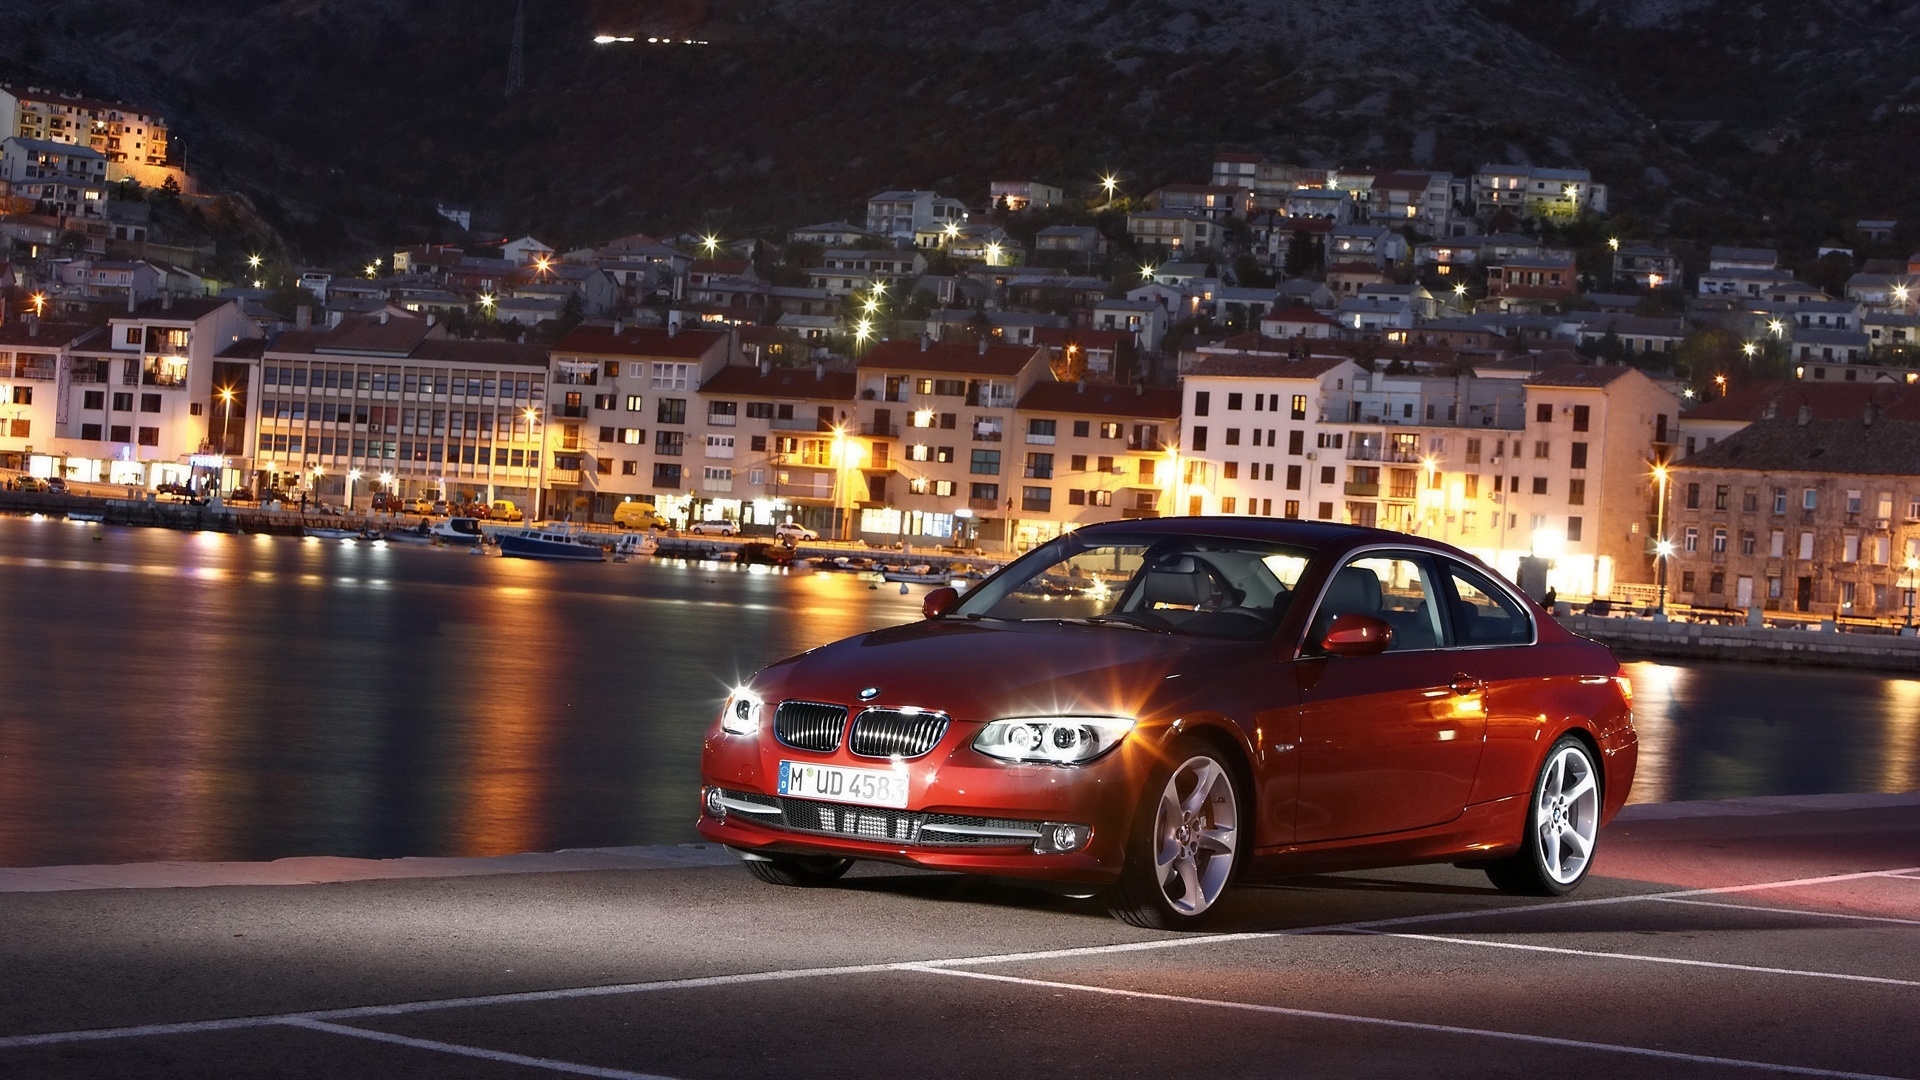 BMW 3 Series 2010 Red Sea Town for 1920 x 1080 HDTV 1080p resolution